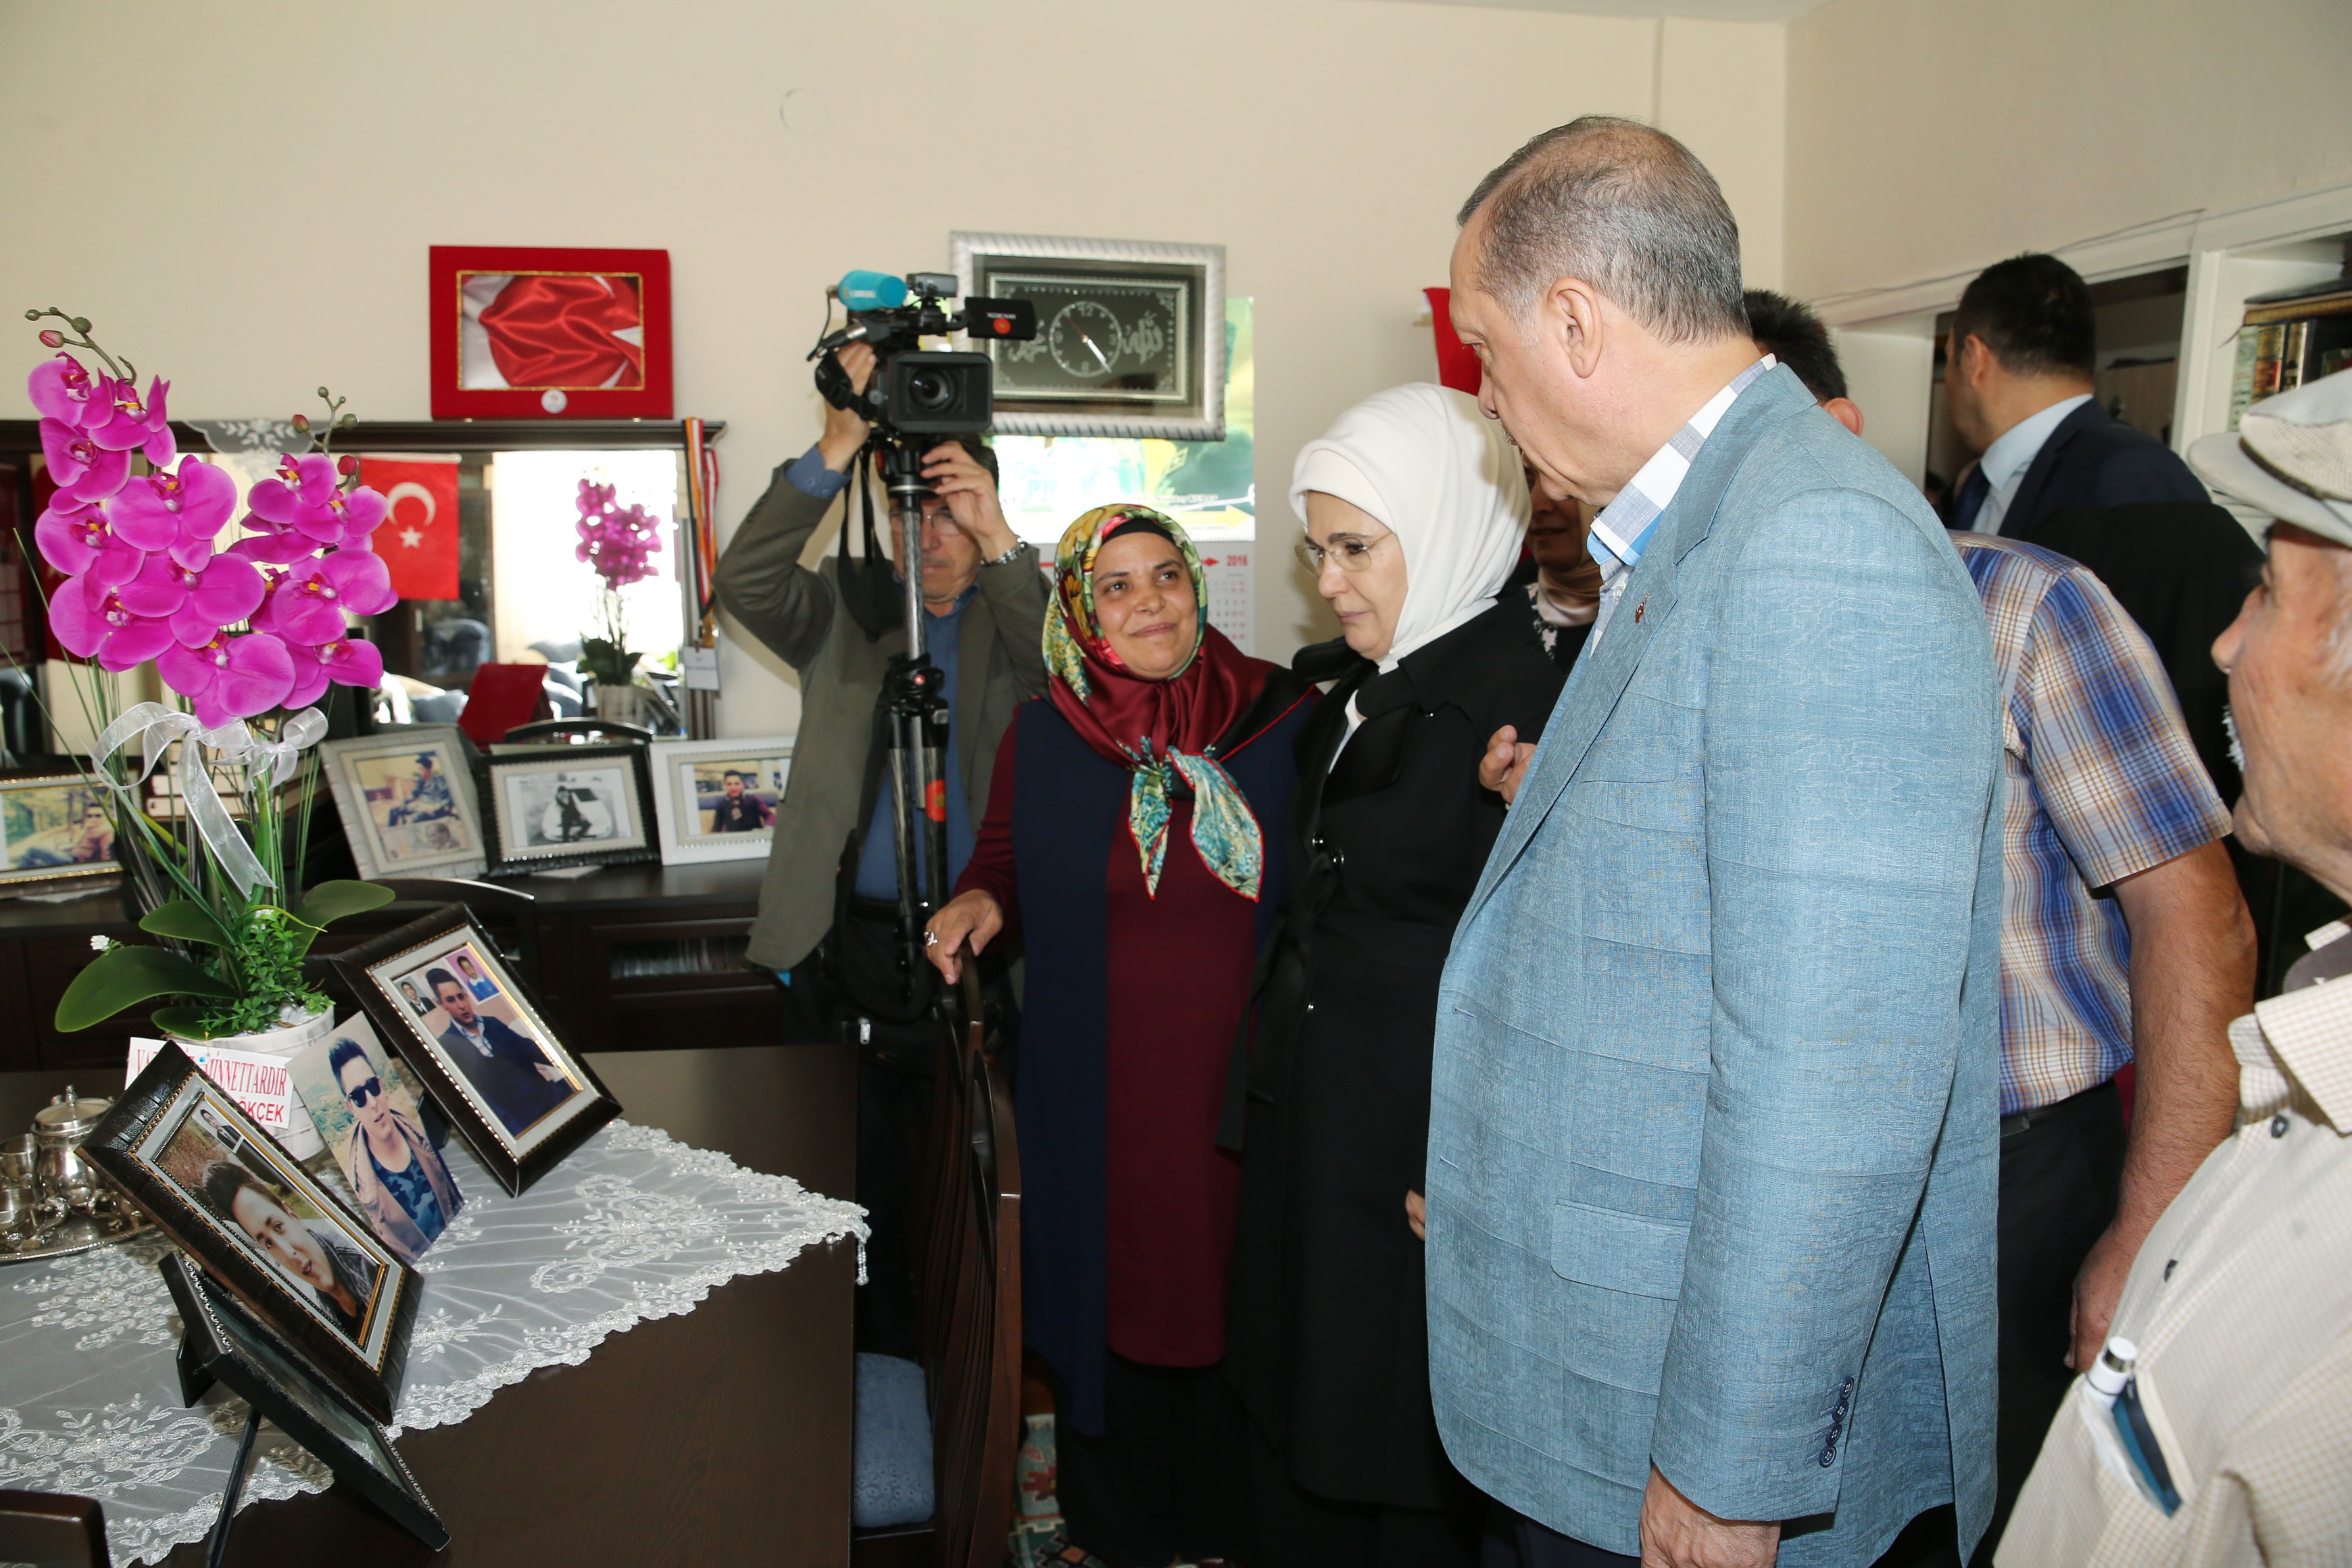 The Takdemir family showed family photos to the president and first lady.